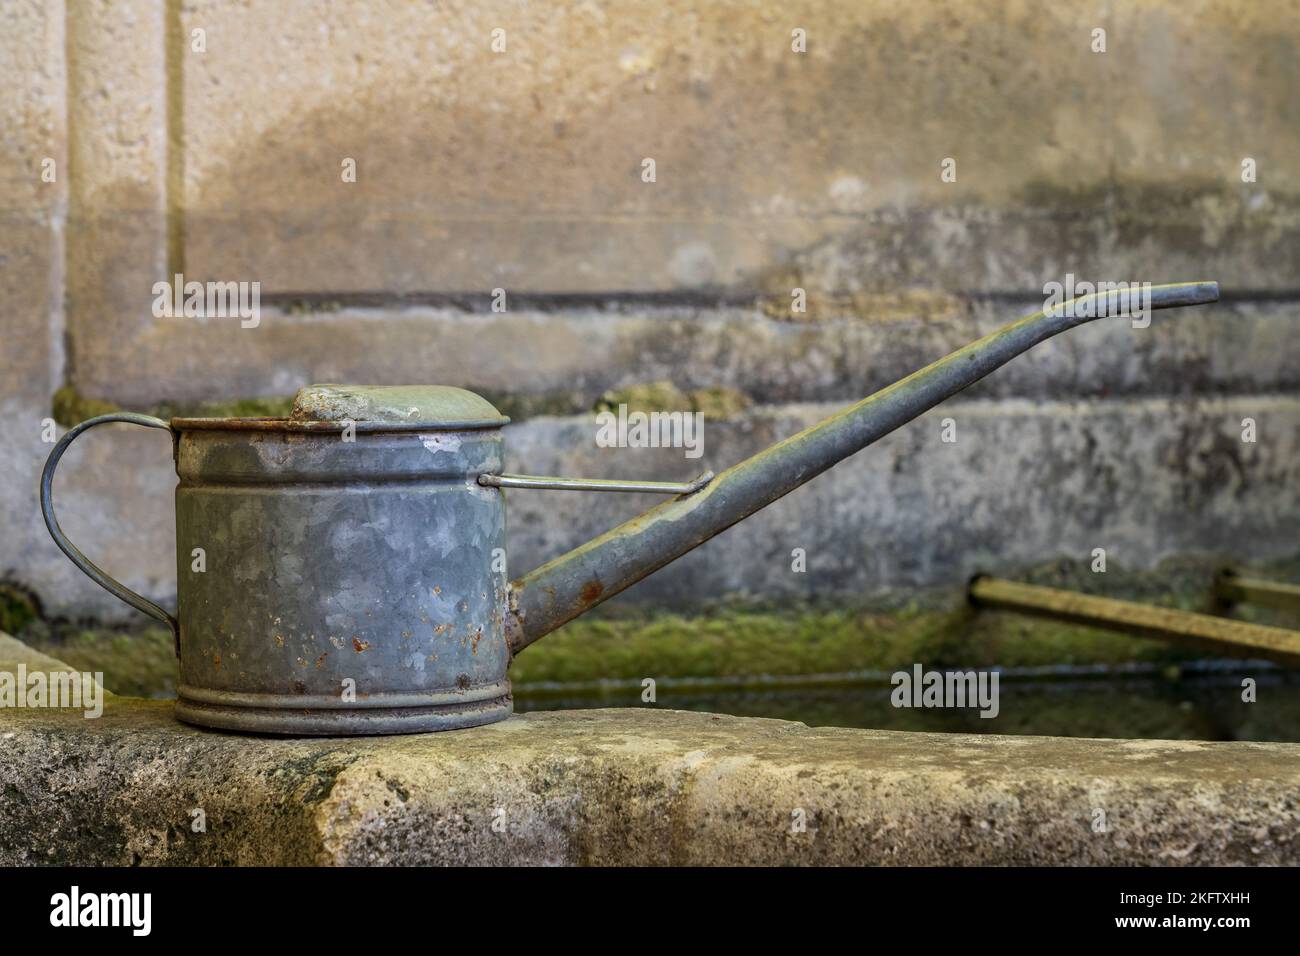 Closeup profile view of traditional vintage tin watering can isolated on stone fountain edge in garden Stock Photo